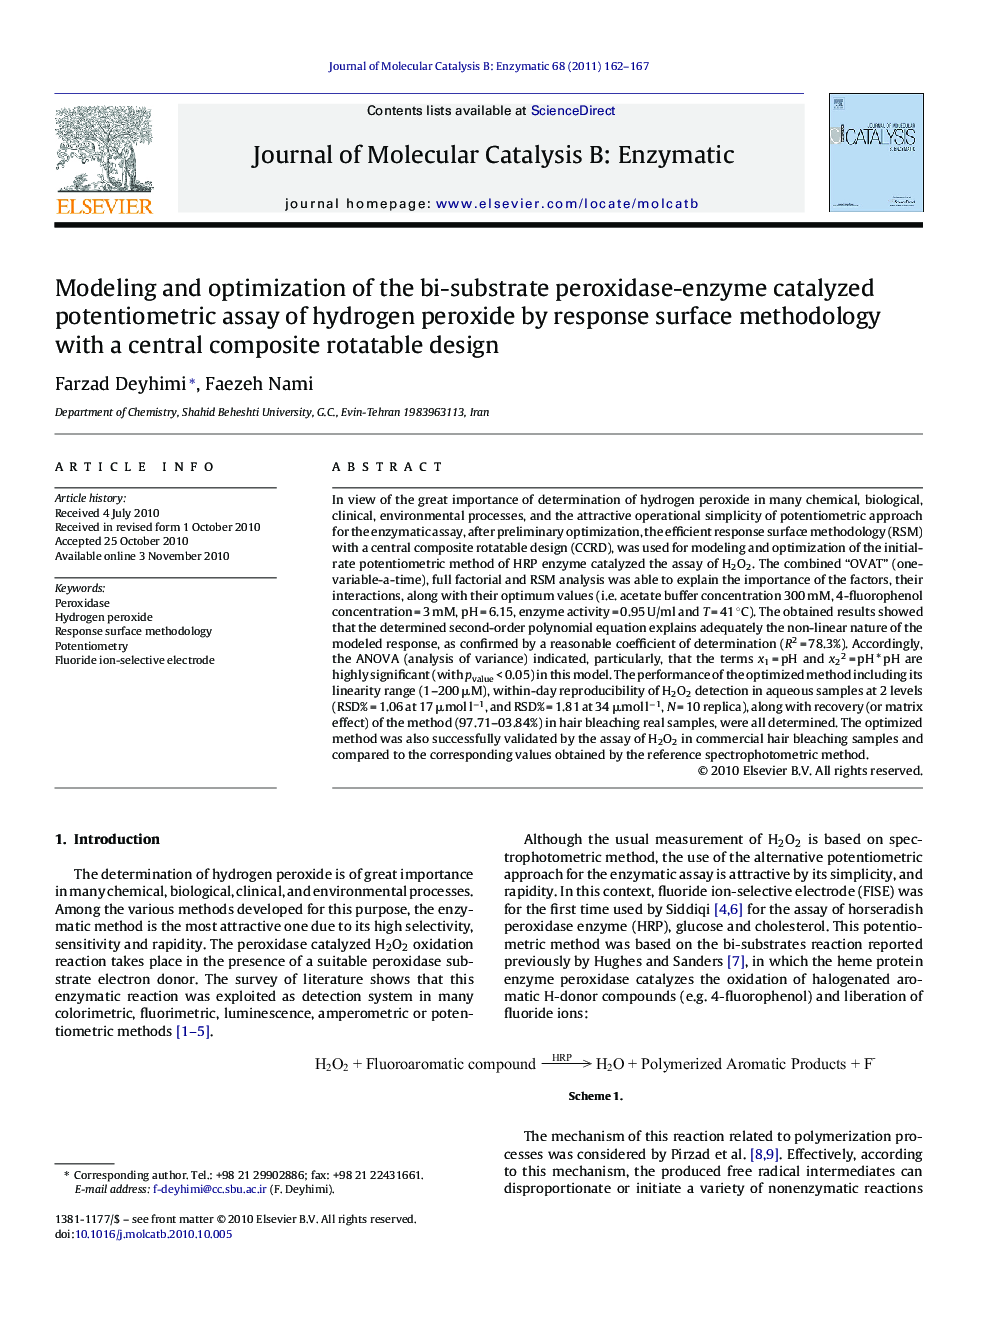 Modeling and optimization of the bi-substrate peroxidase-enzyme catalyzed potentiometric assay of hydrogen peroxide by response surface methodology with a central composite rotatable design